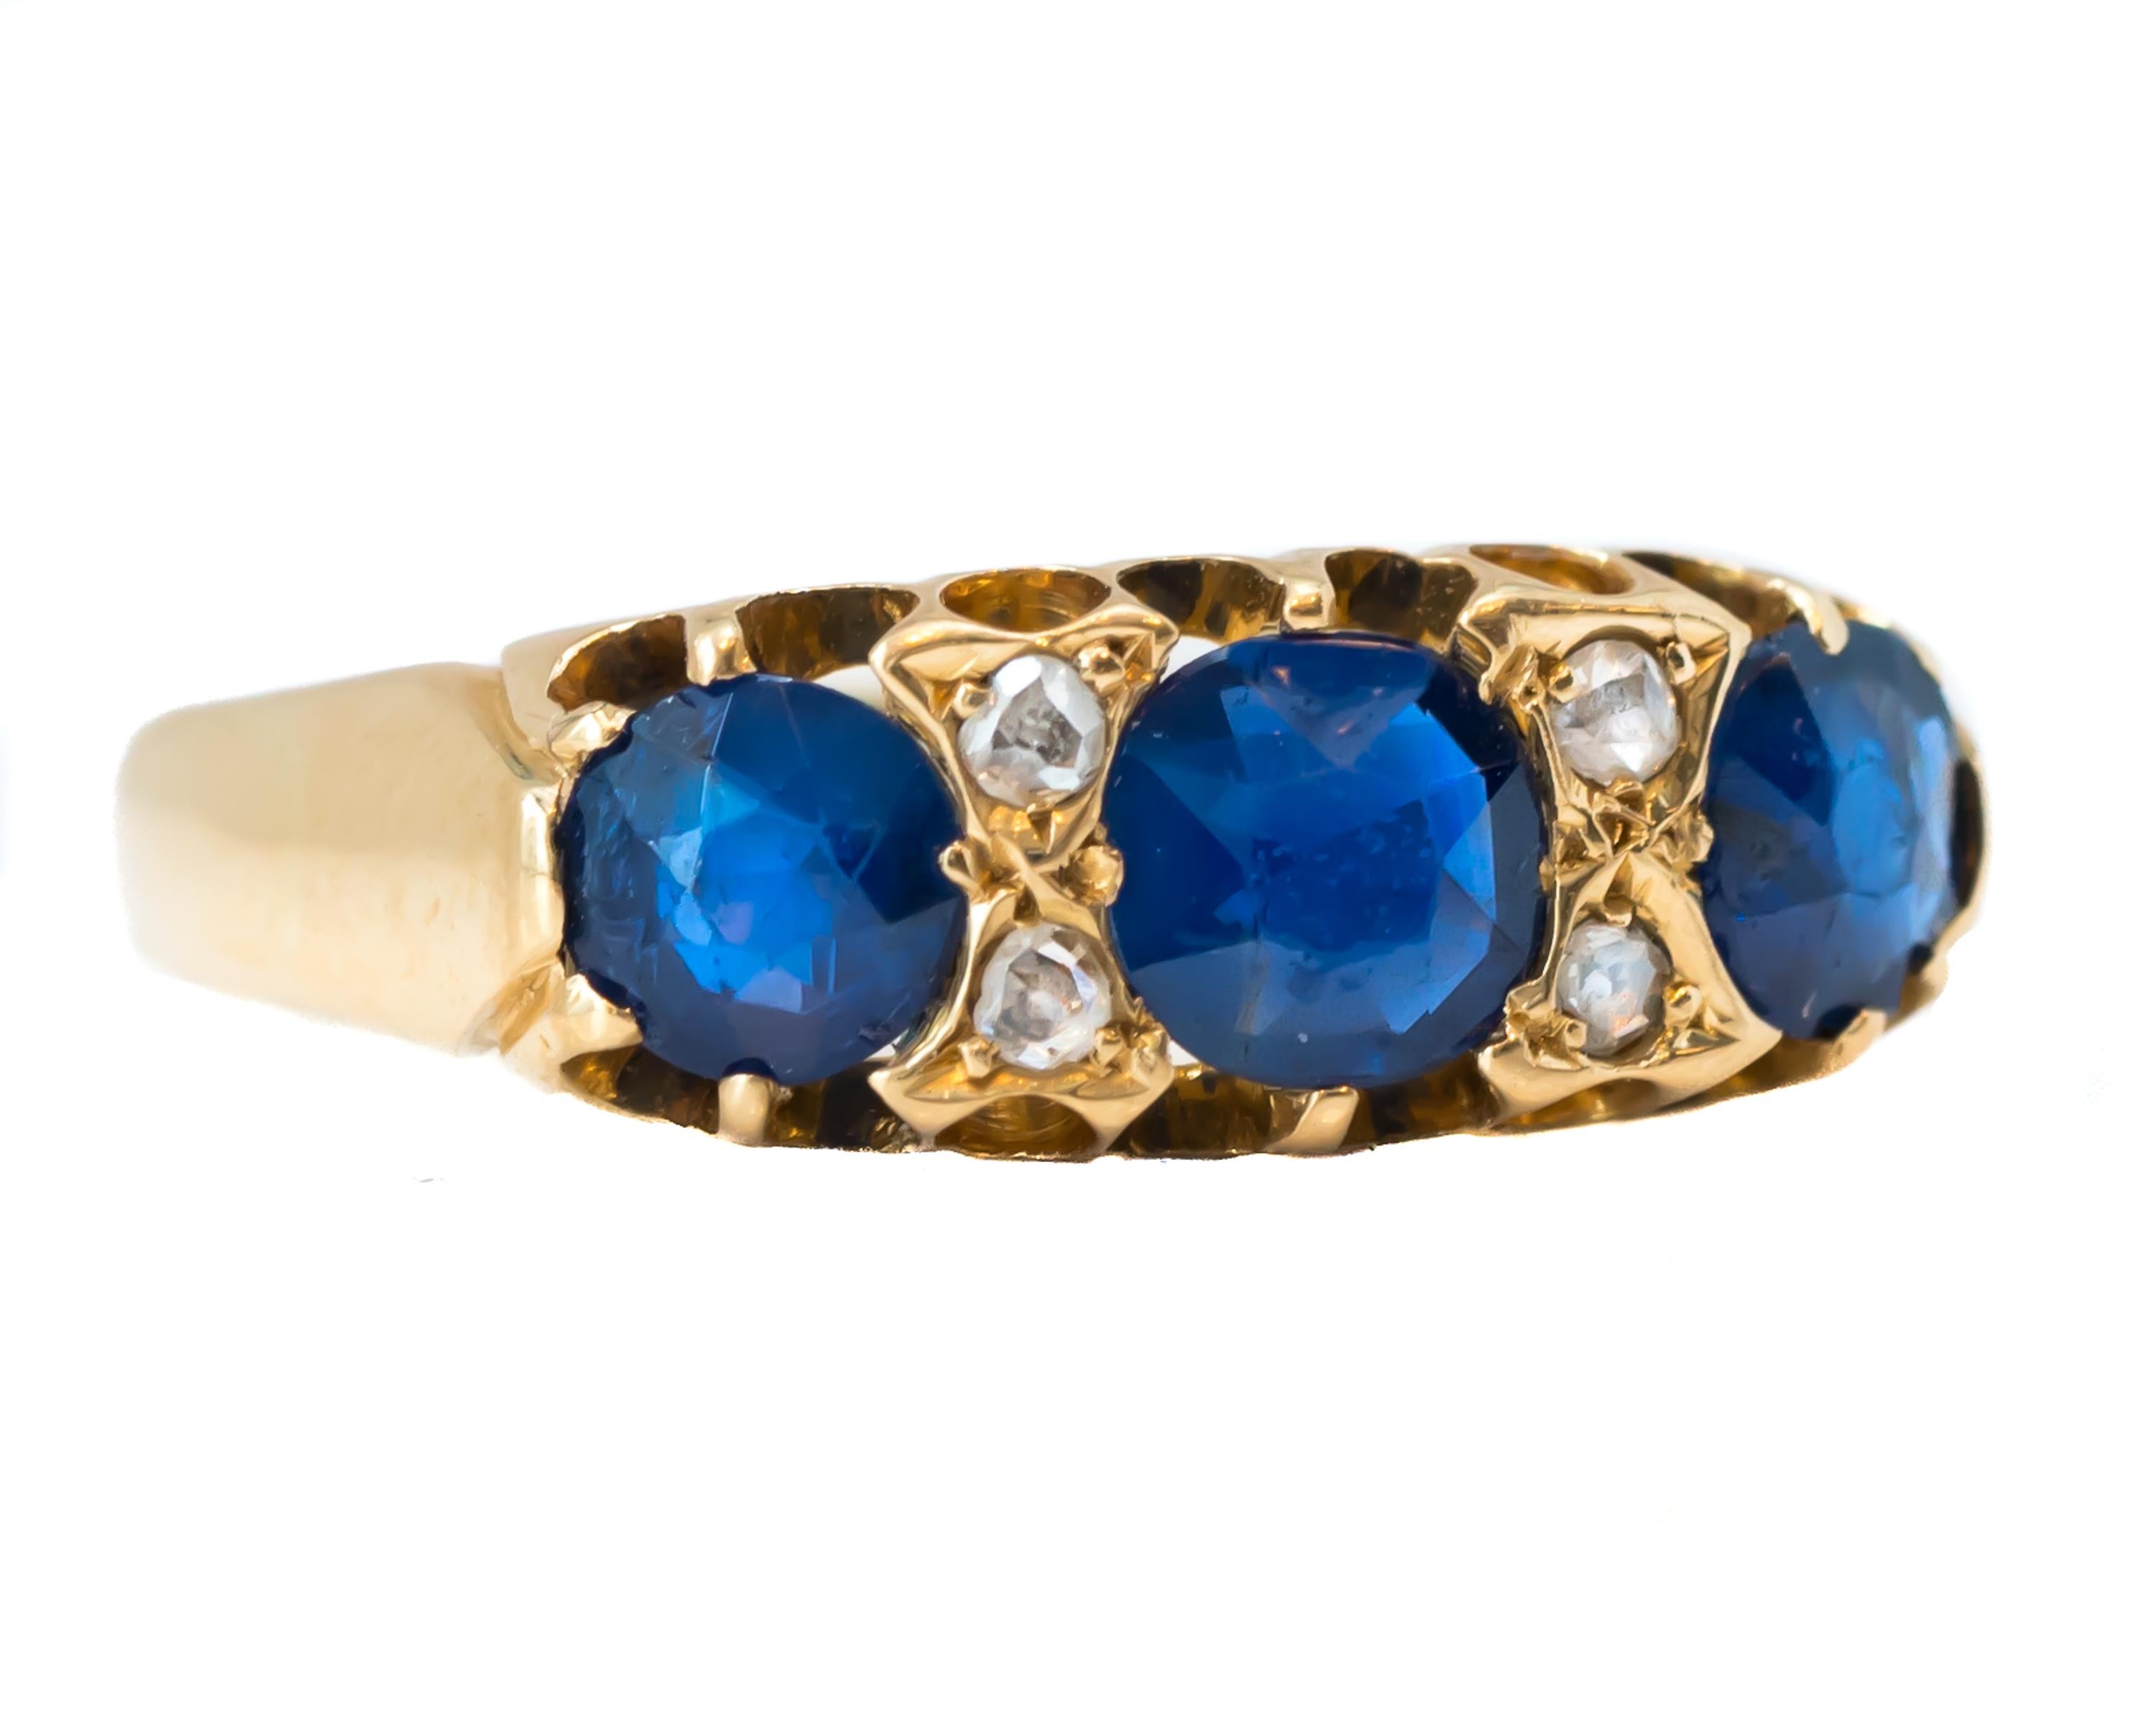 1920s Art Deco Sapphire and Diamond Ring - 18 karat Yellow Gold, Blue Sapphires, Diamonds

Features:
3 Round Blue Sapphires and 4 Old Mine cut Diamonds
18 karat Yellow Gold Cathedral setting with Open Gallery
Hallmarks include a W.J.H 18 and a Crown